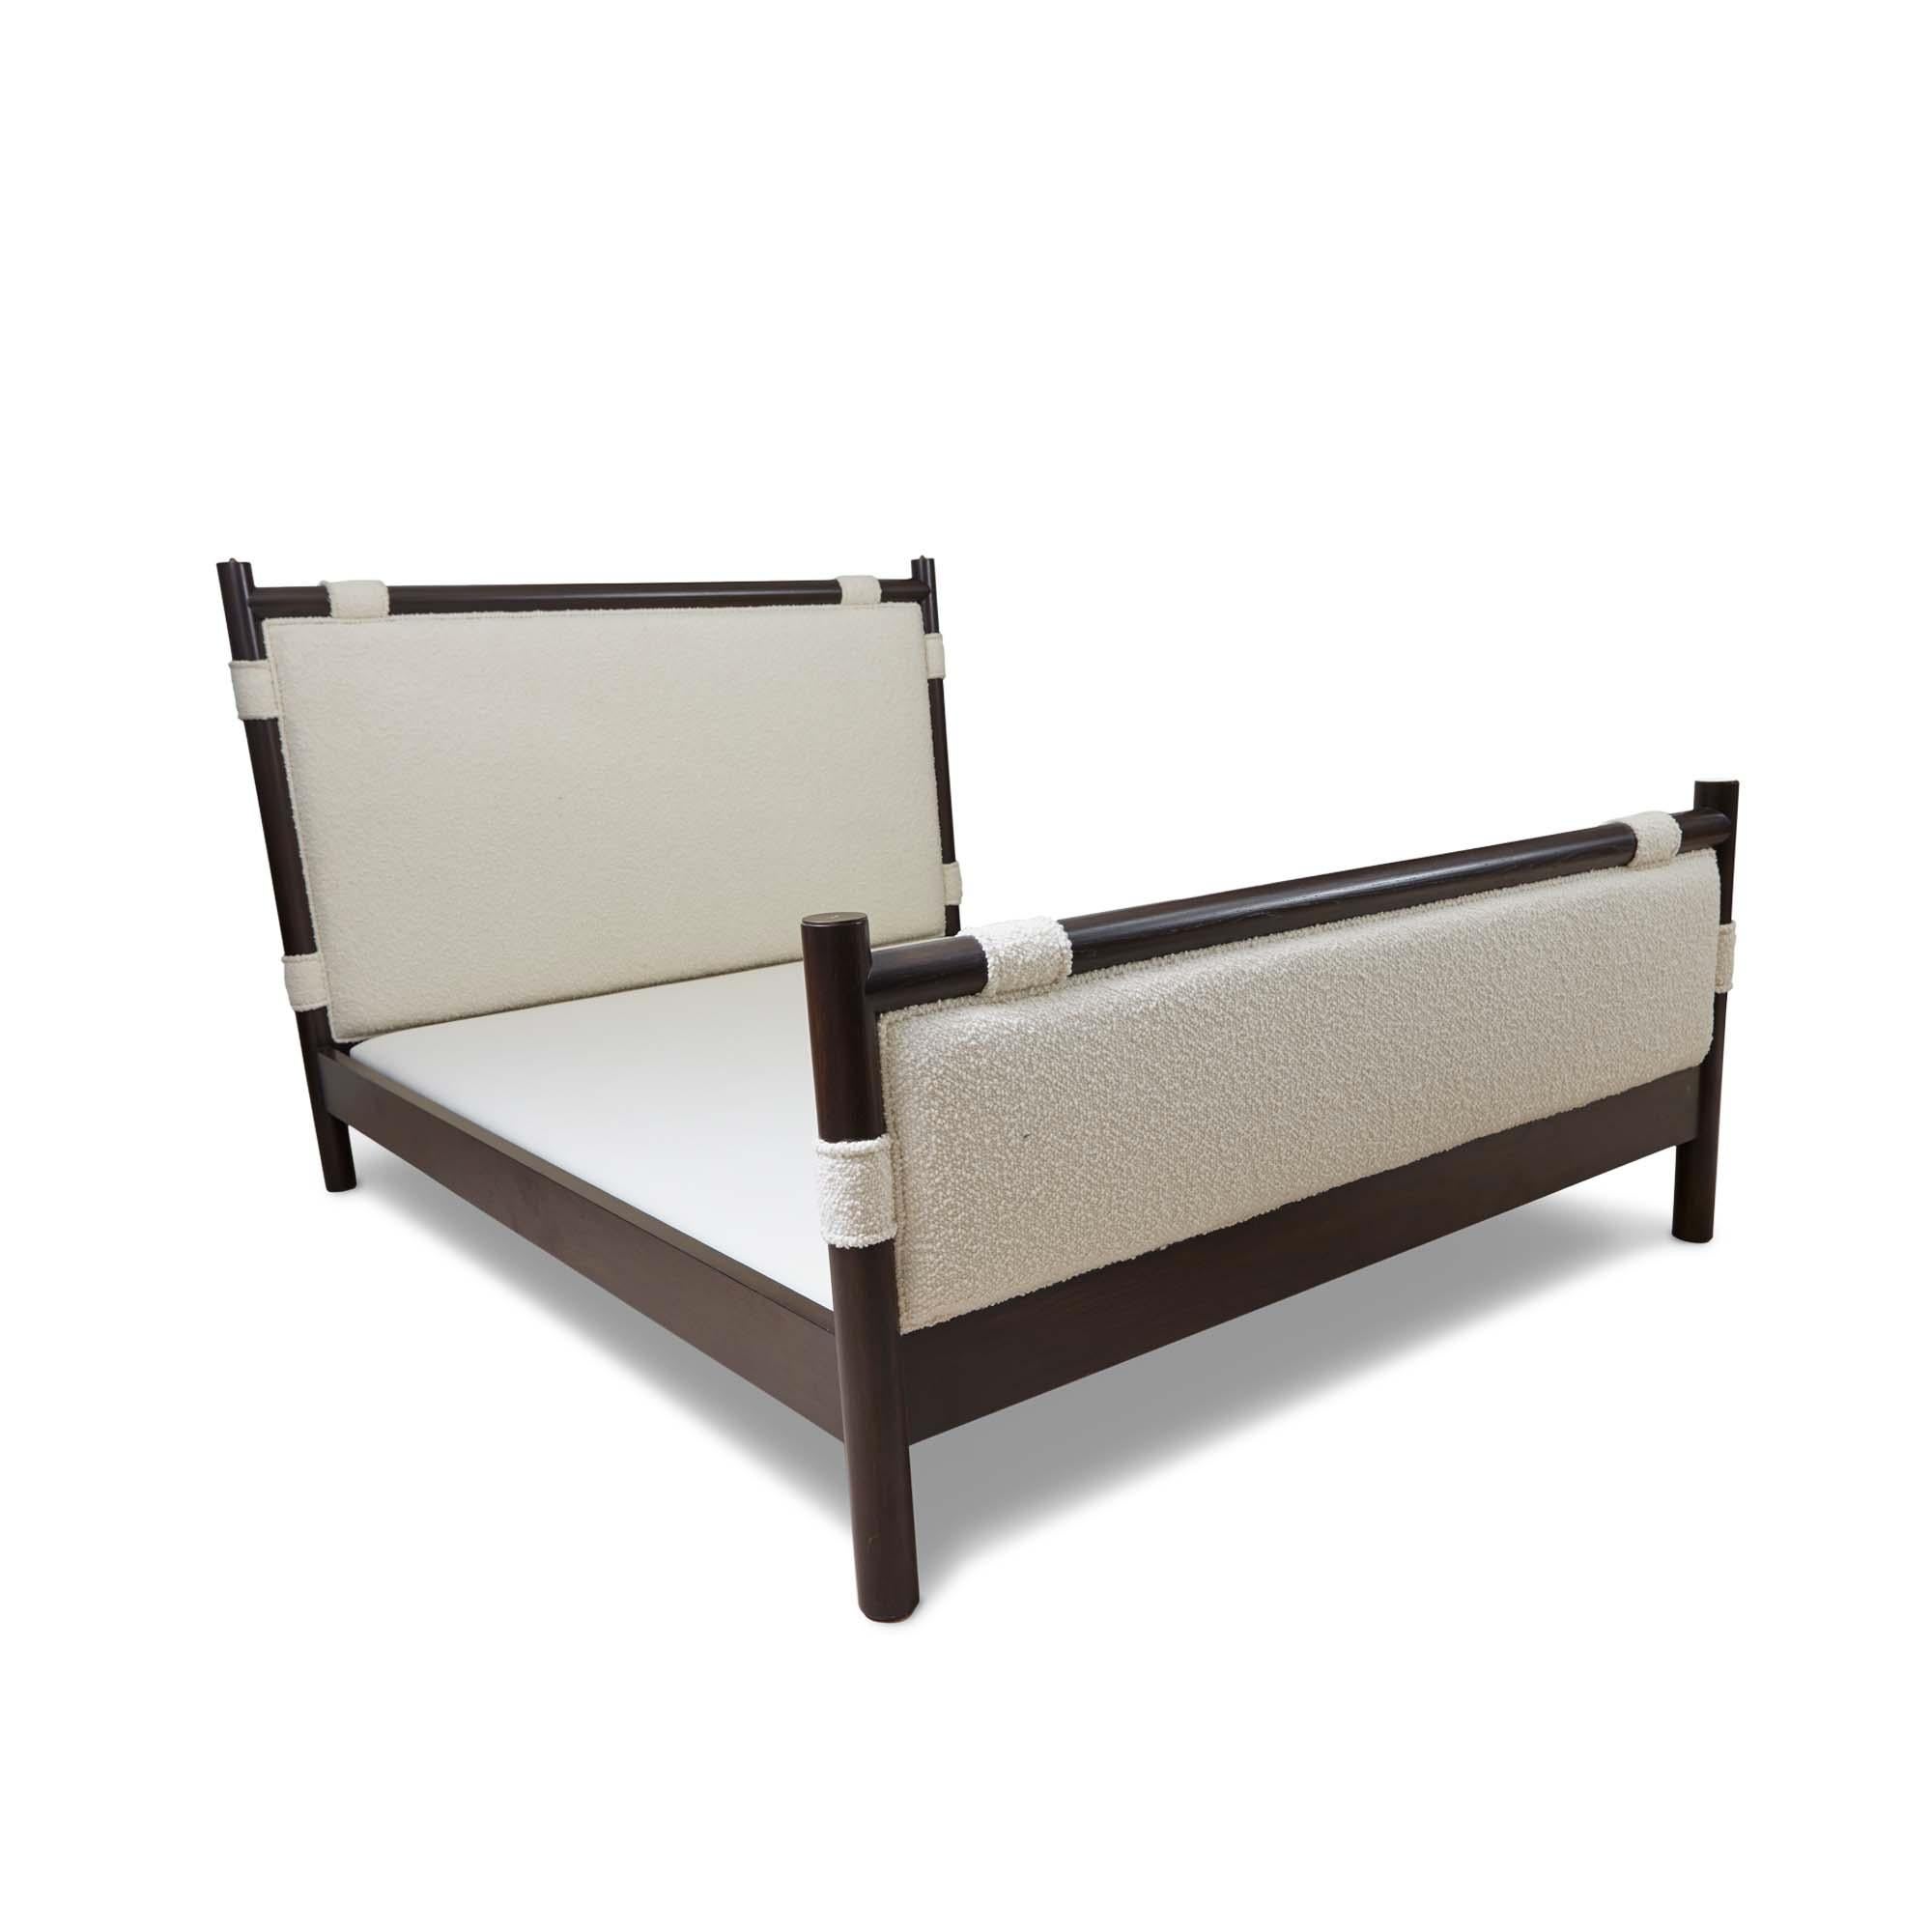 The Chiselhurst bed is an upholstered bed with a solid American Walnut or White Oak frame finished with brass caps. Slats are provided. Available with or without footboard. Shown here in Dark Walnut and Alpaca Bouclé. 

The Lawson-Fenning